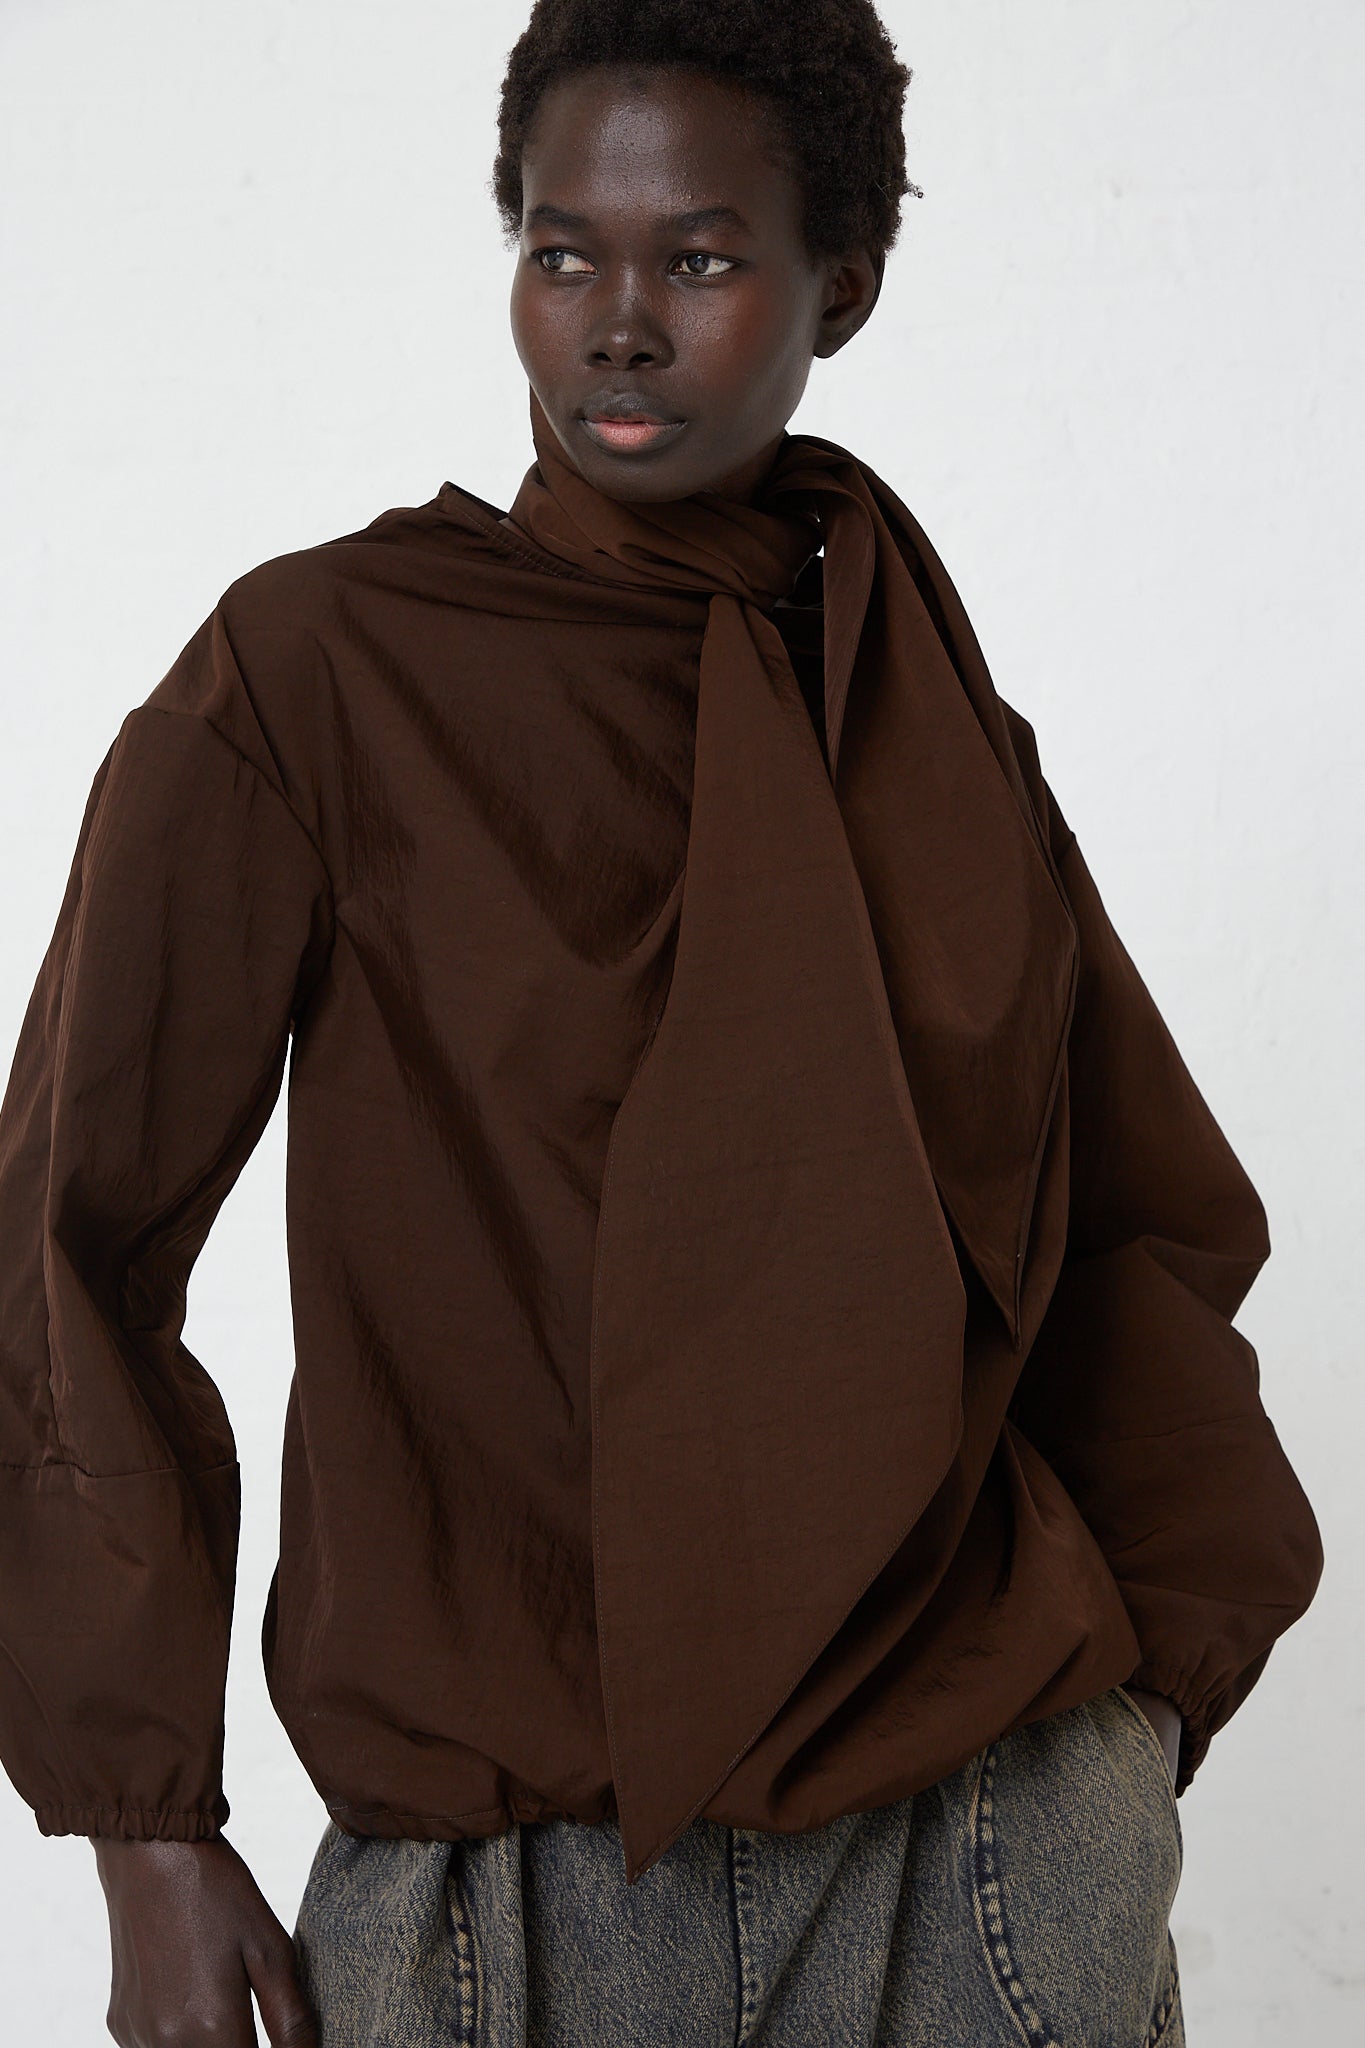 A woman wearing a Veronique Leroy Zipped on Sleeve Rain Blouse in Choco.